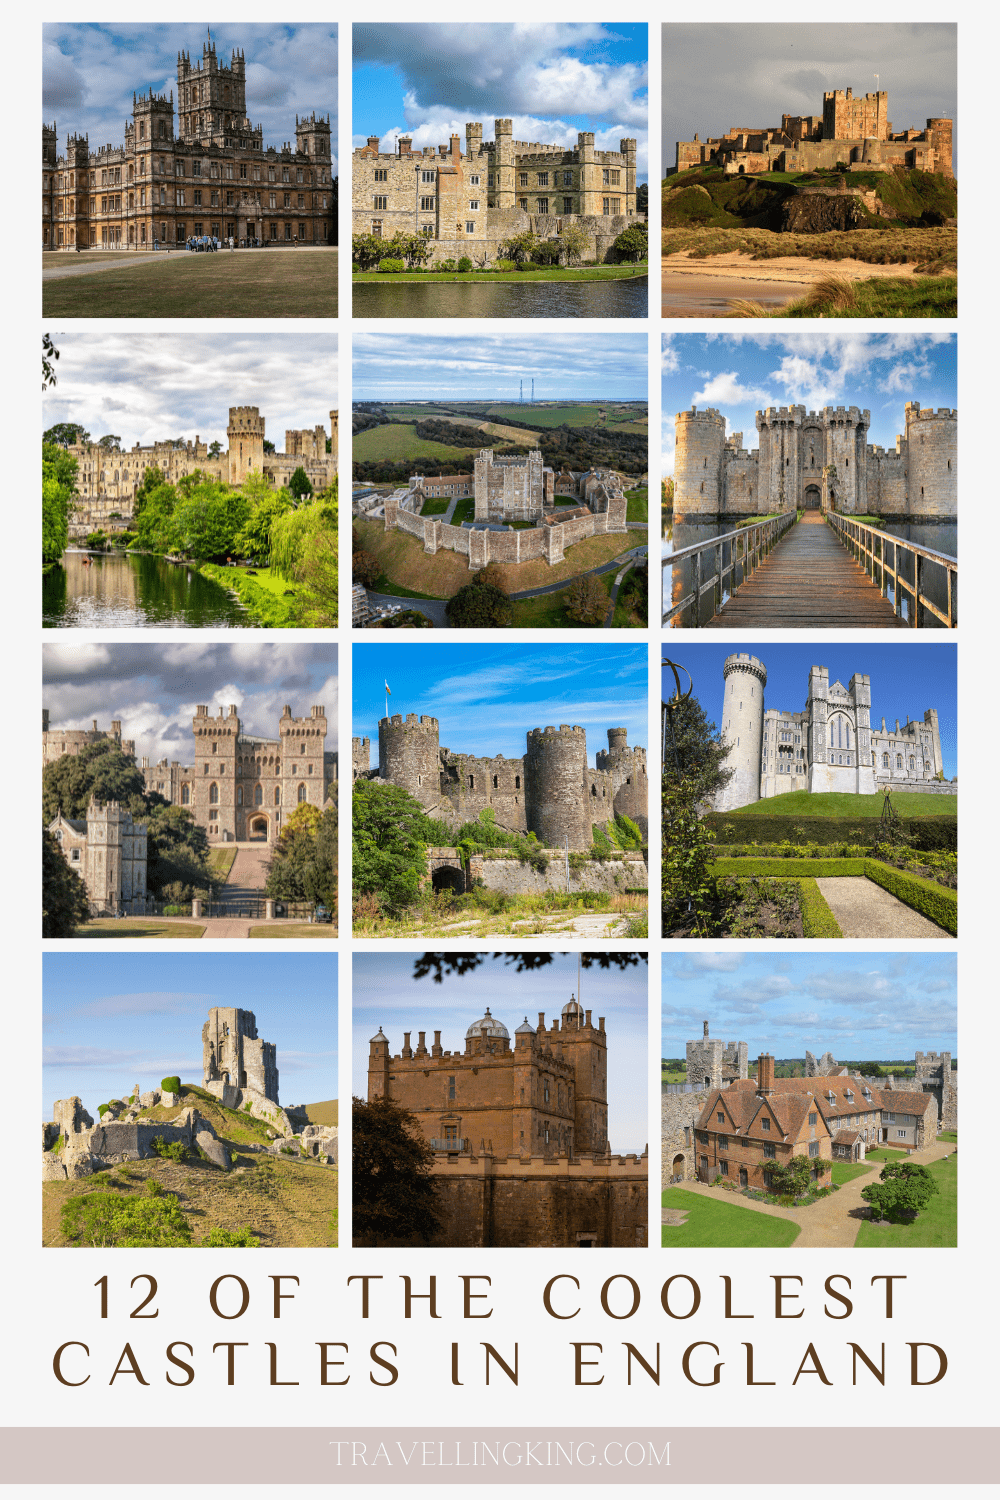 12 of the Coolest Castles in England